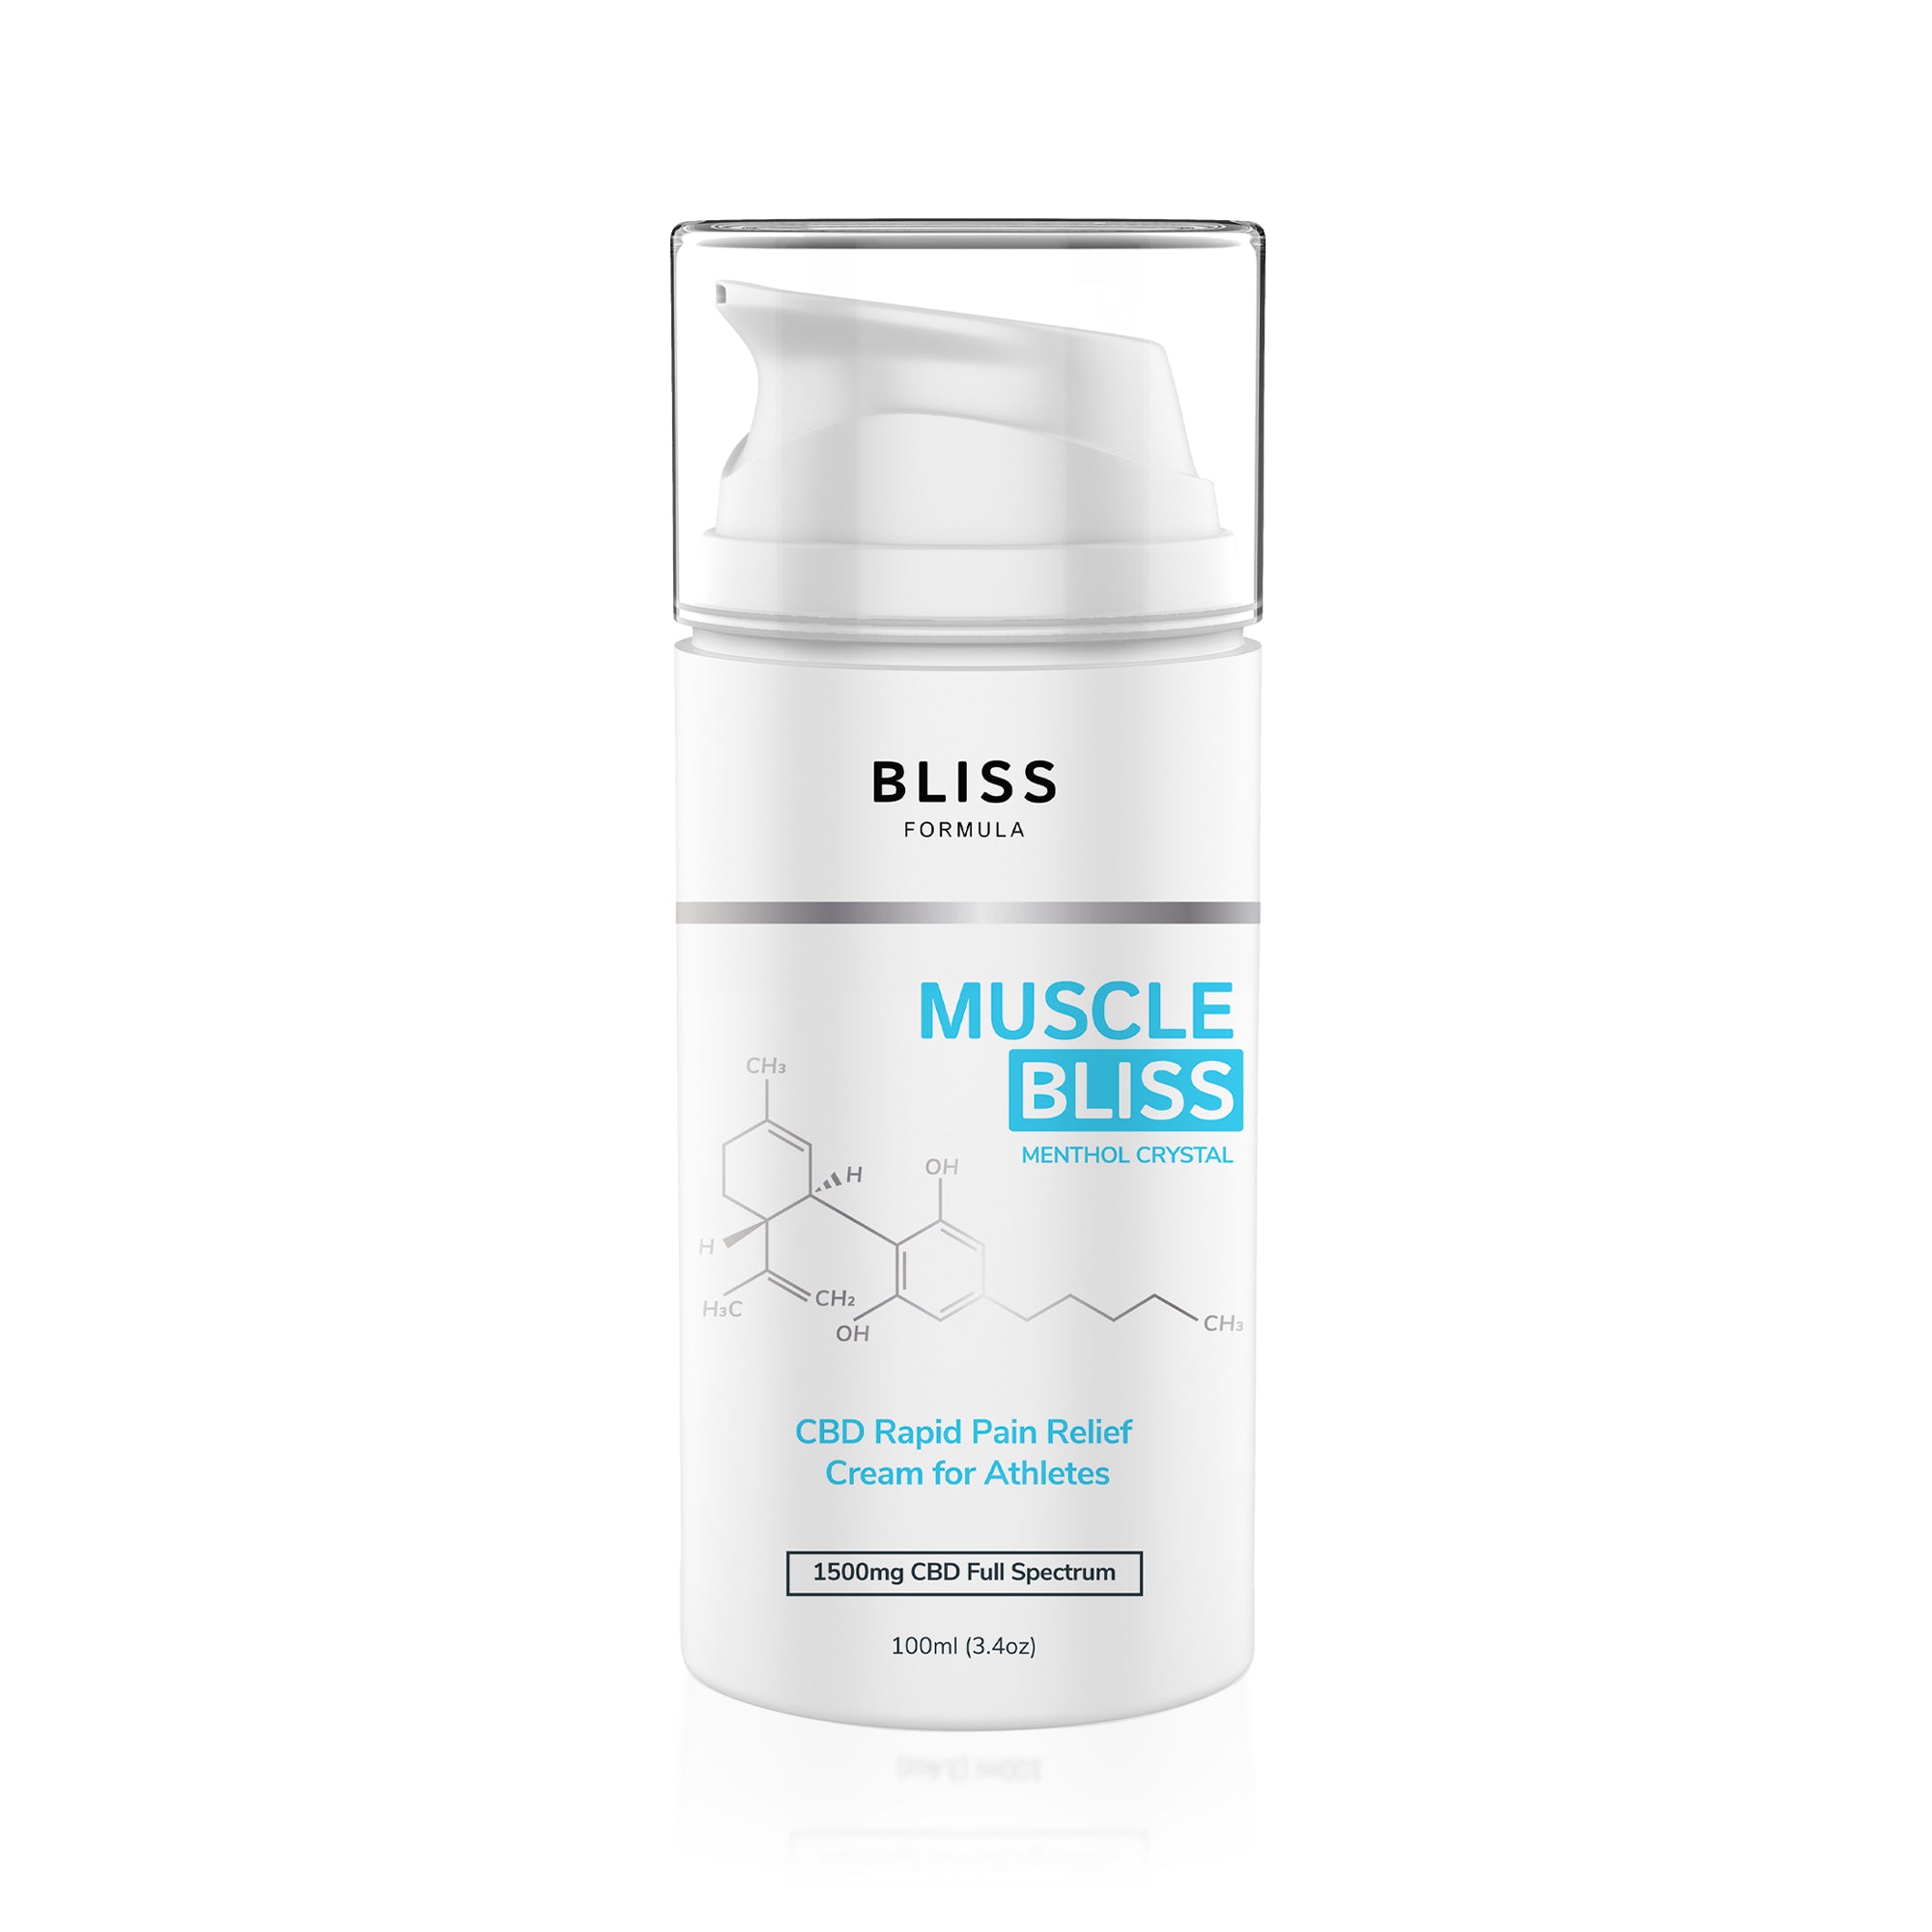 bliss muscle cream athletes